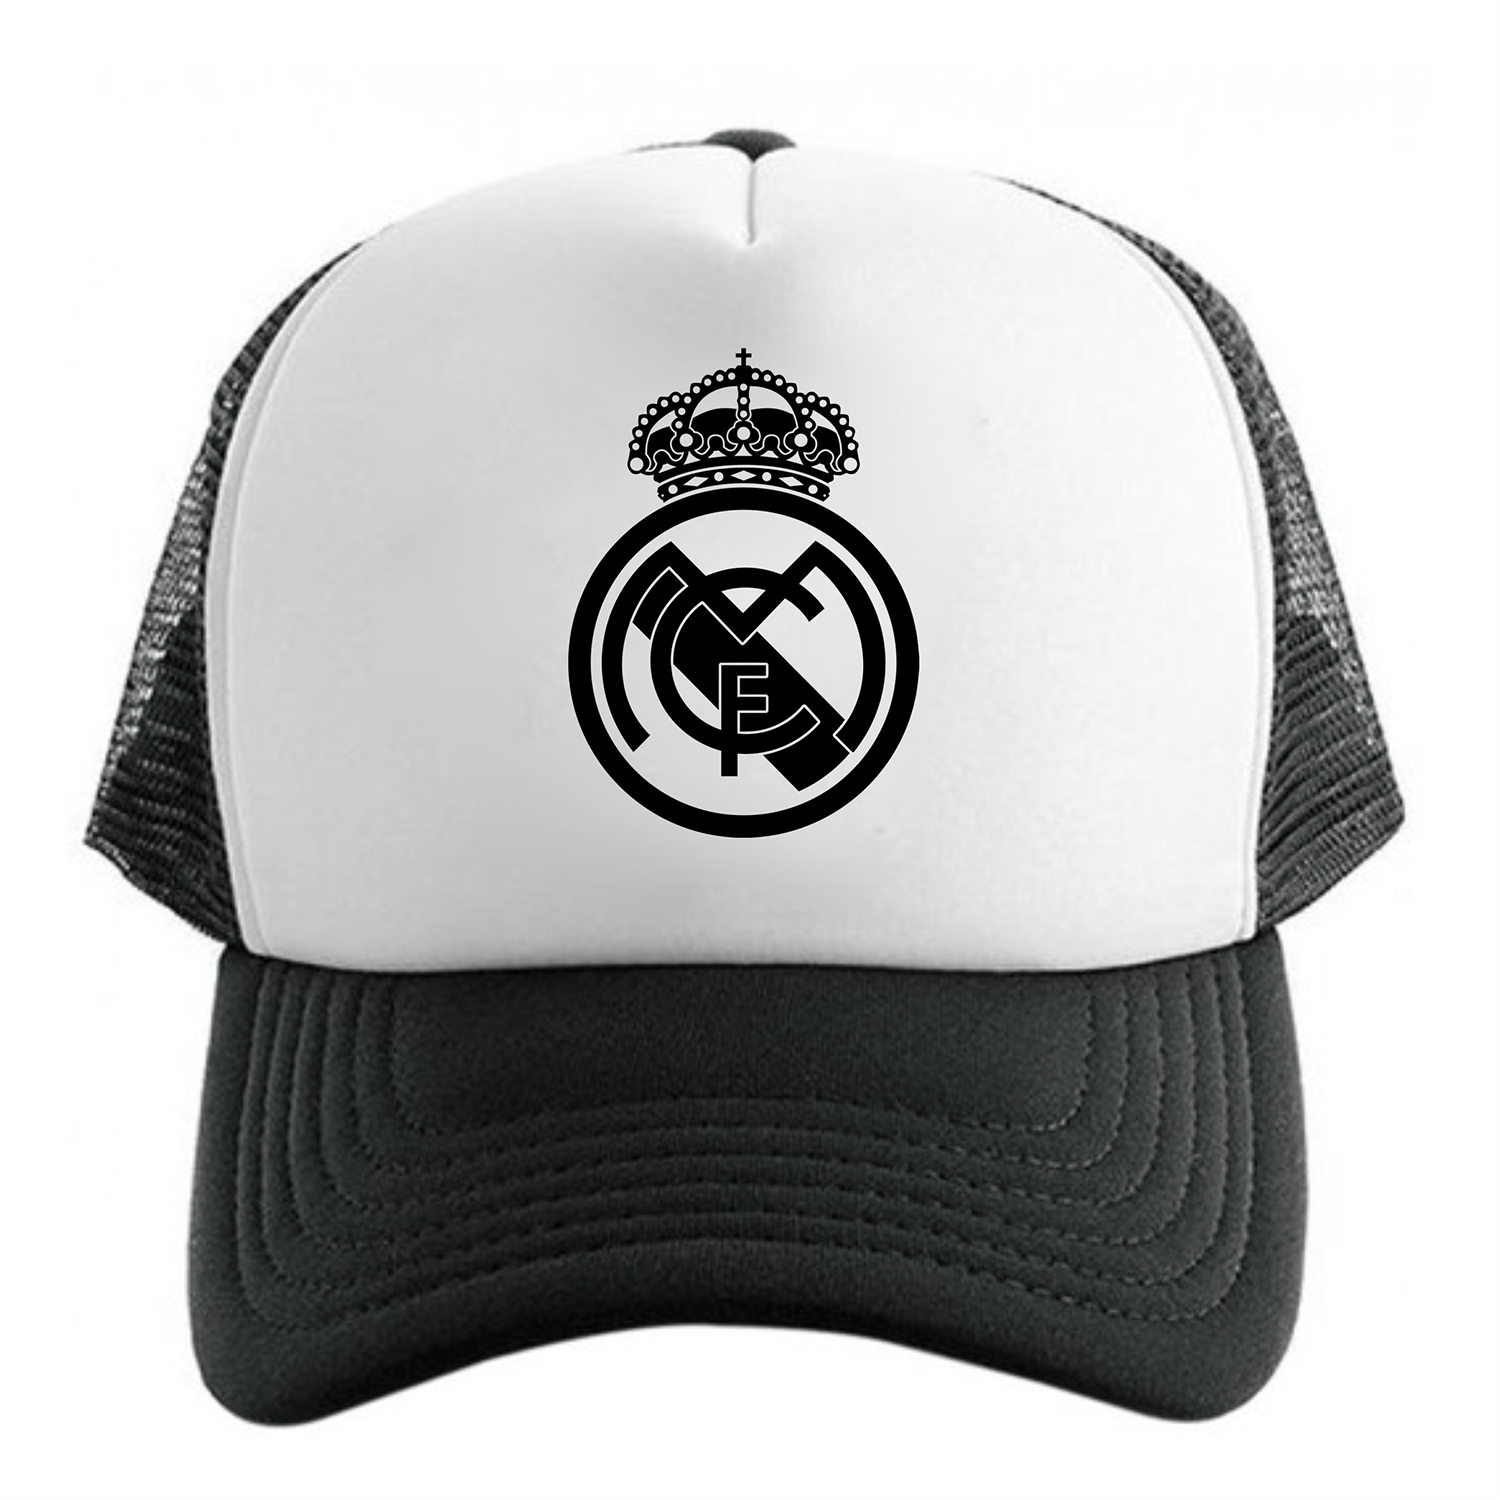 Gorra Real Madrid Color Negro